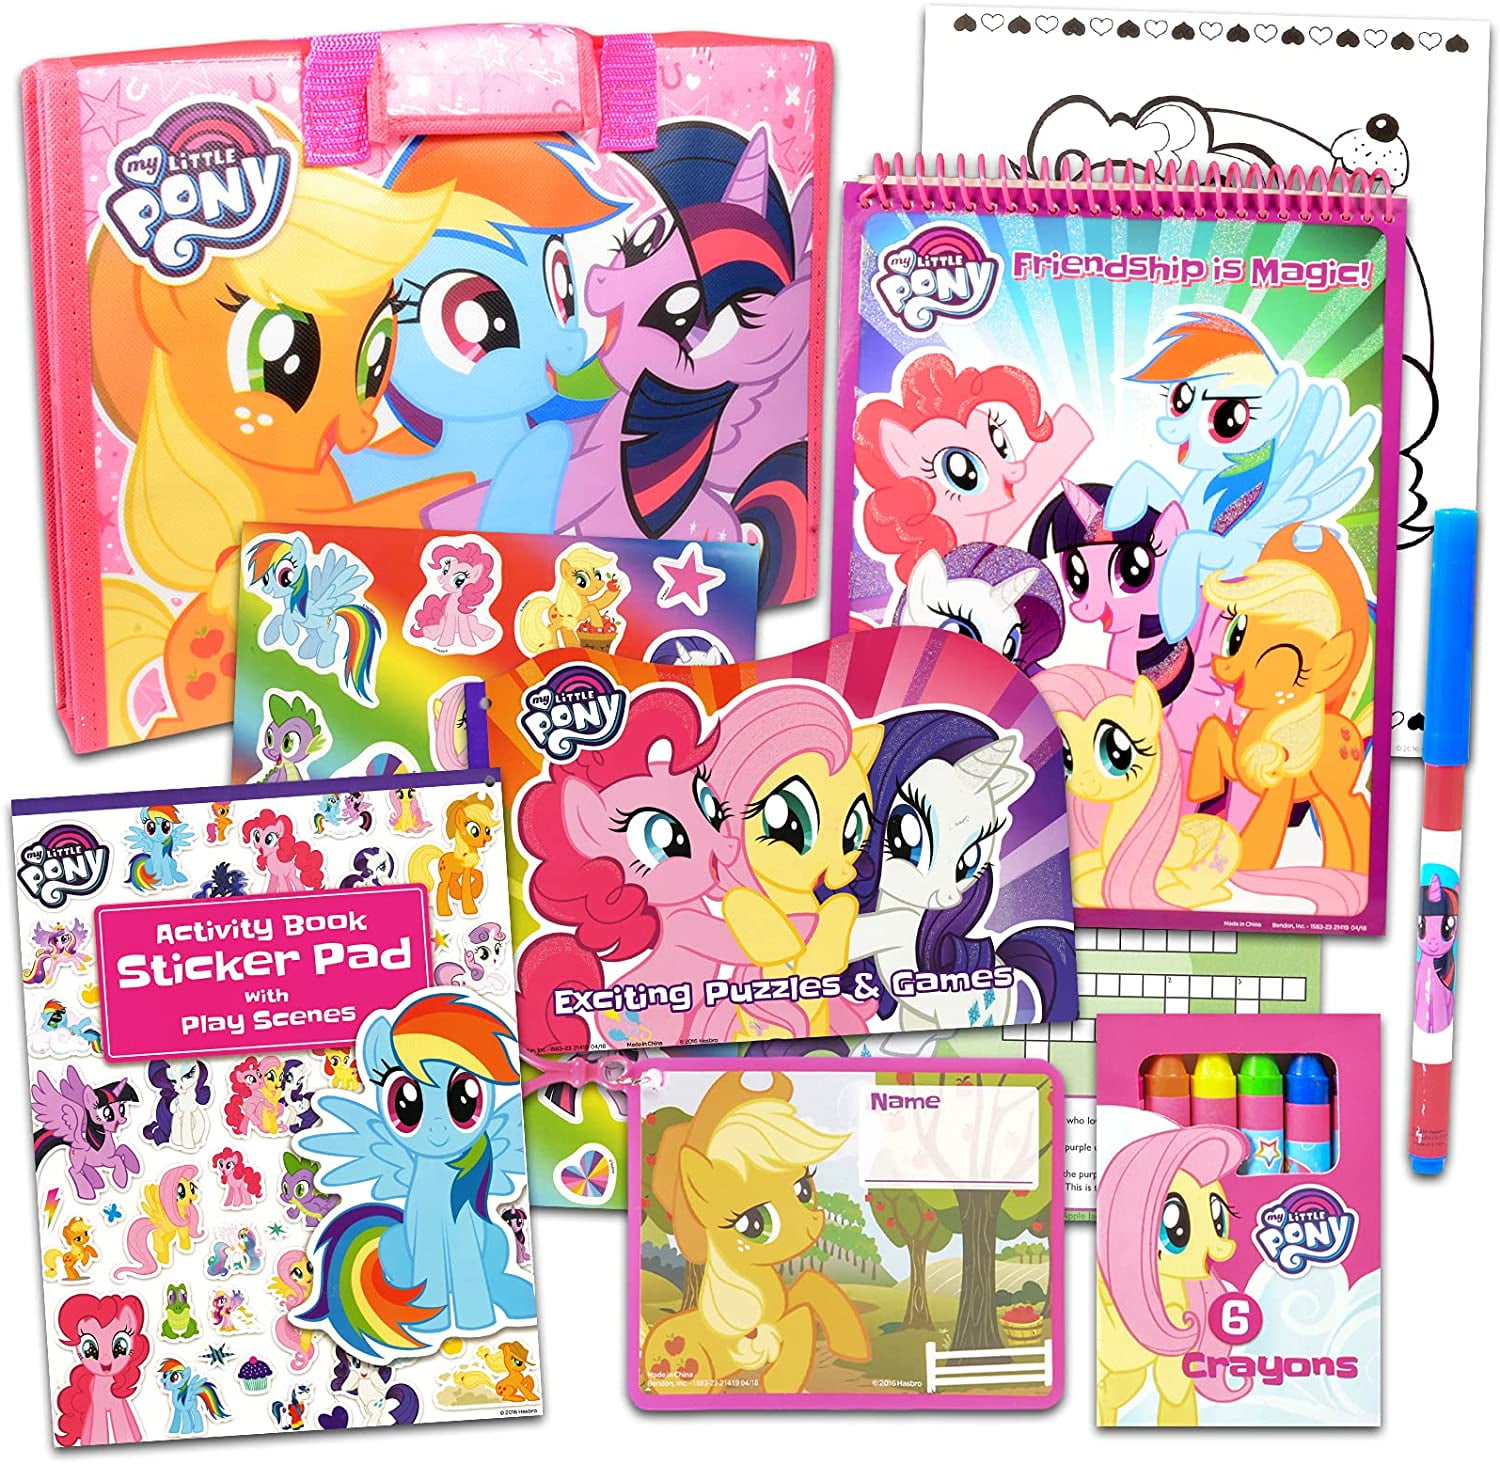 Set Of All 4; Stickers My Little Pony Decorative Tin Candy And More Inside! 